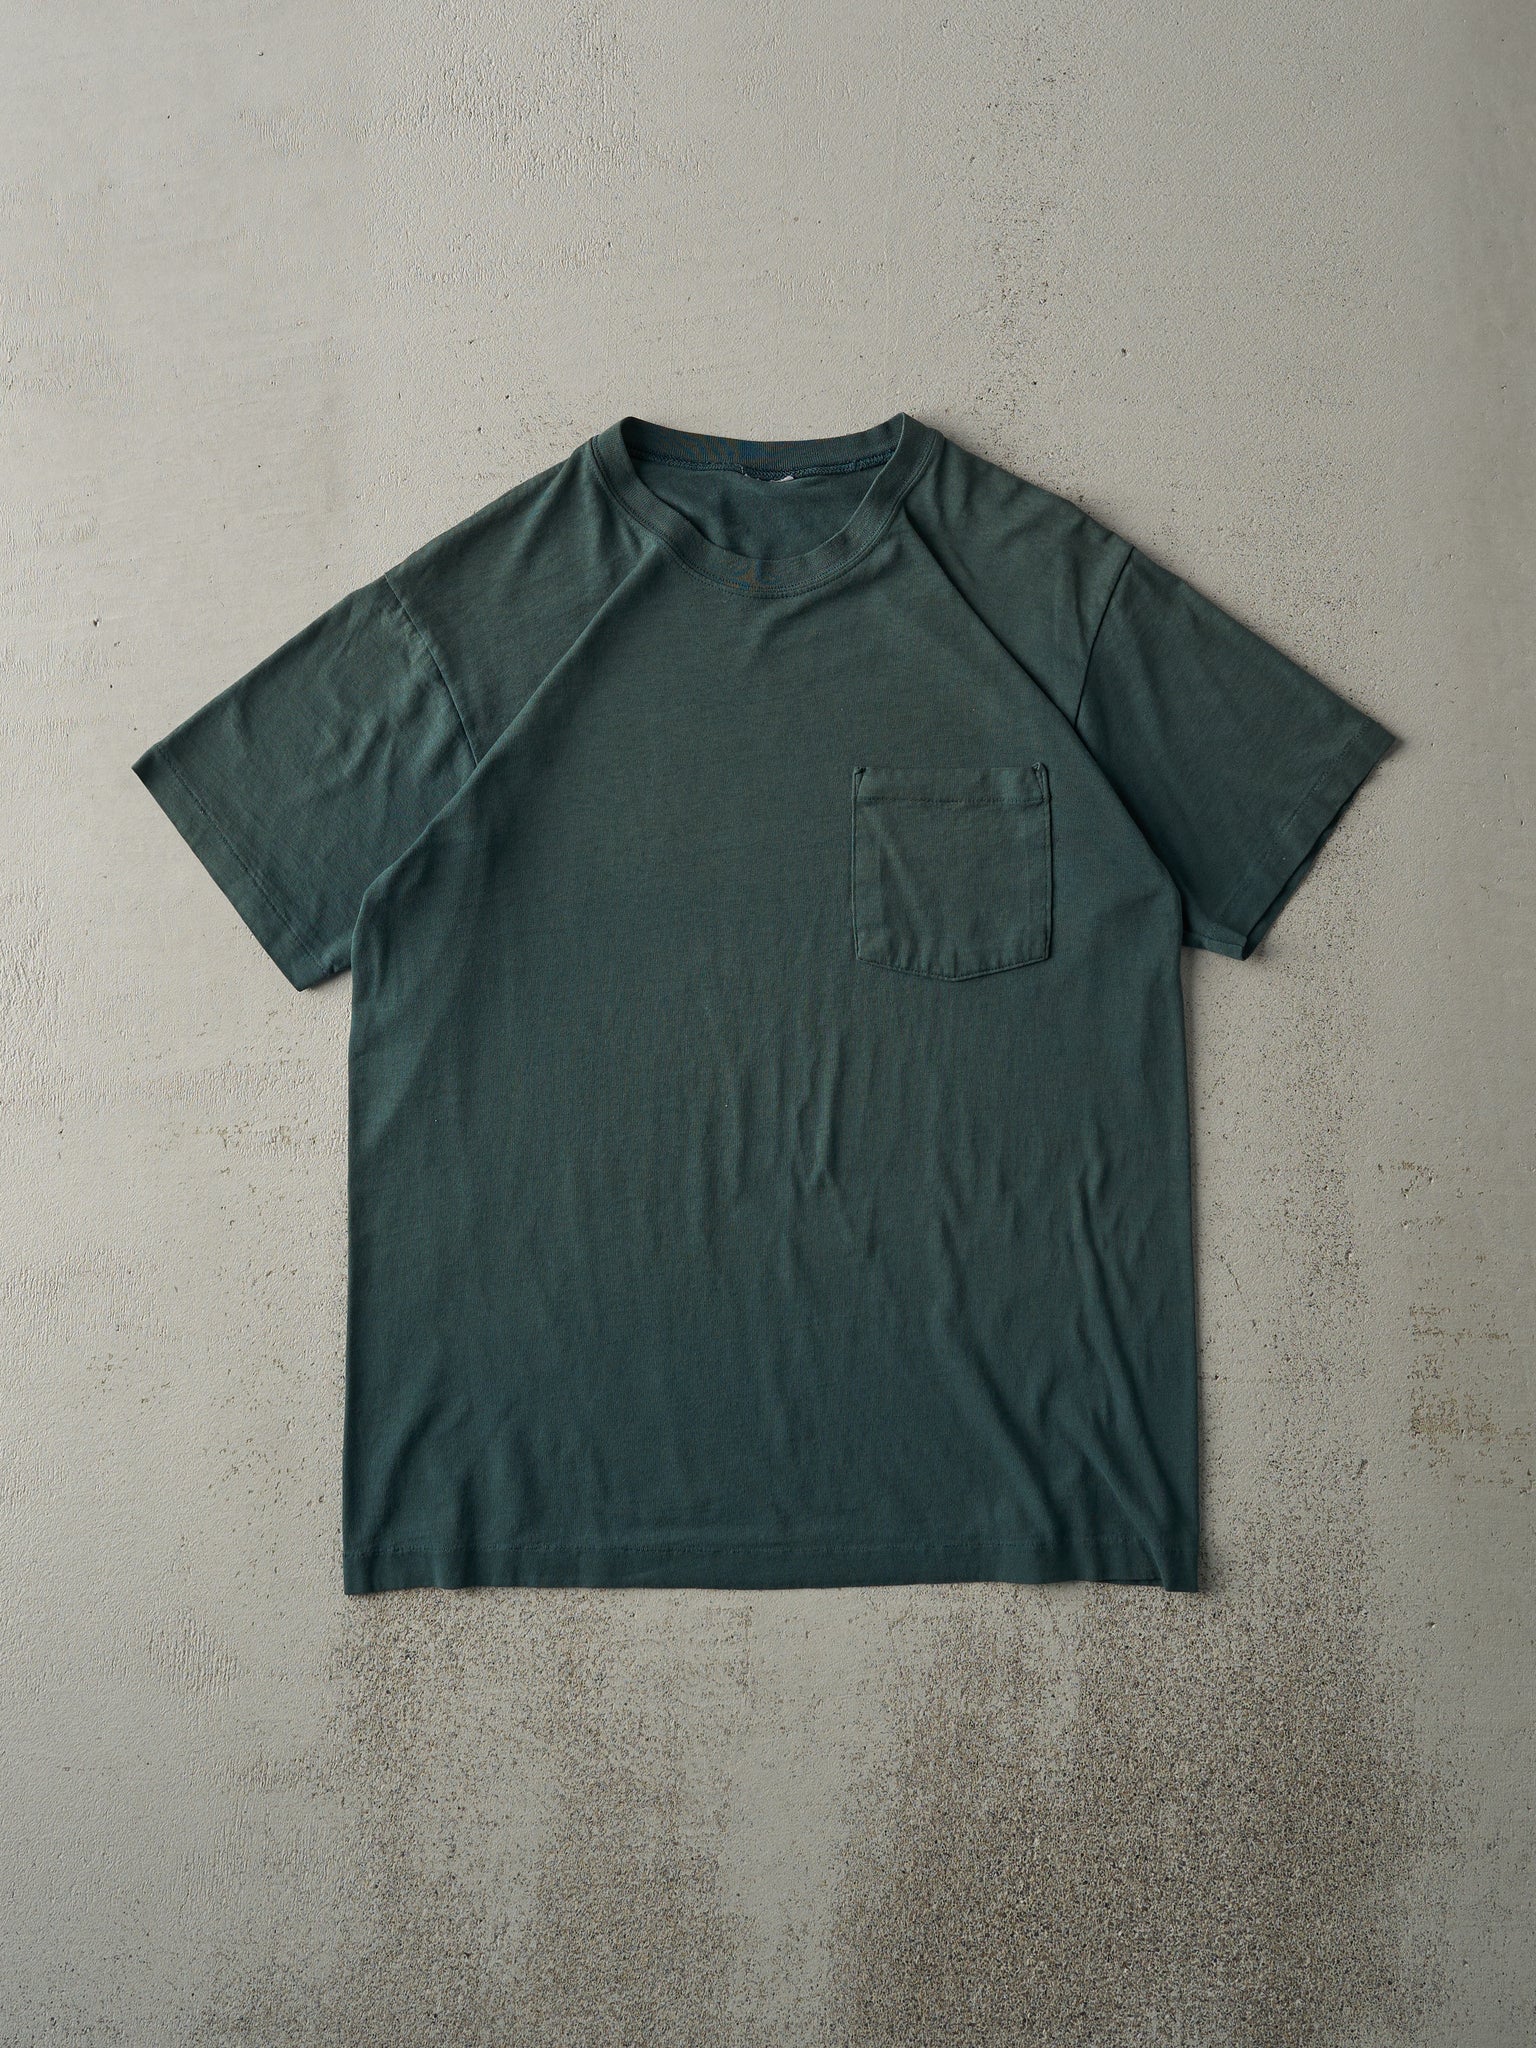 Vintage 90s Forest Green Blank Pocket Tee (S/M)